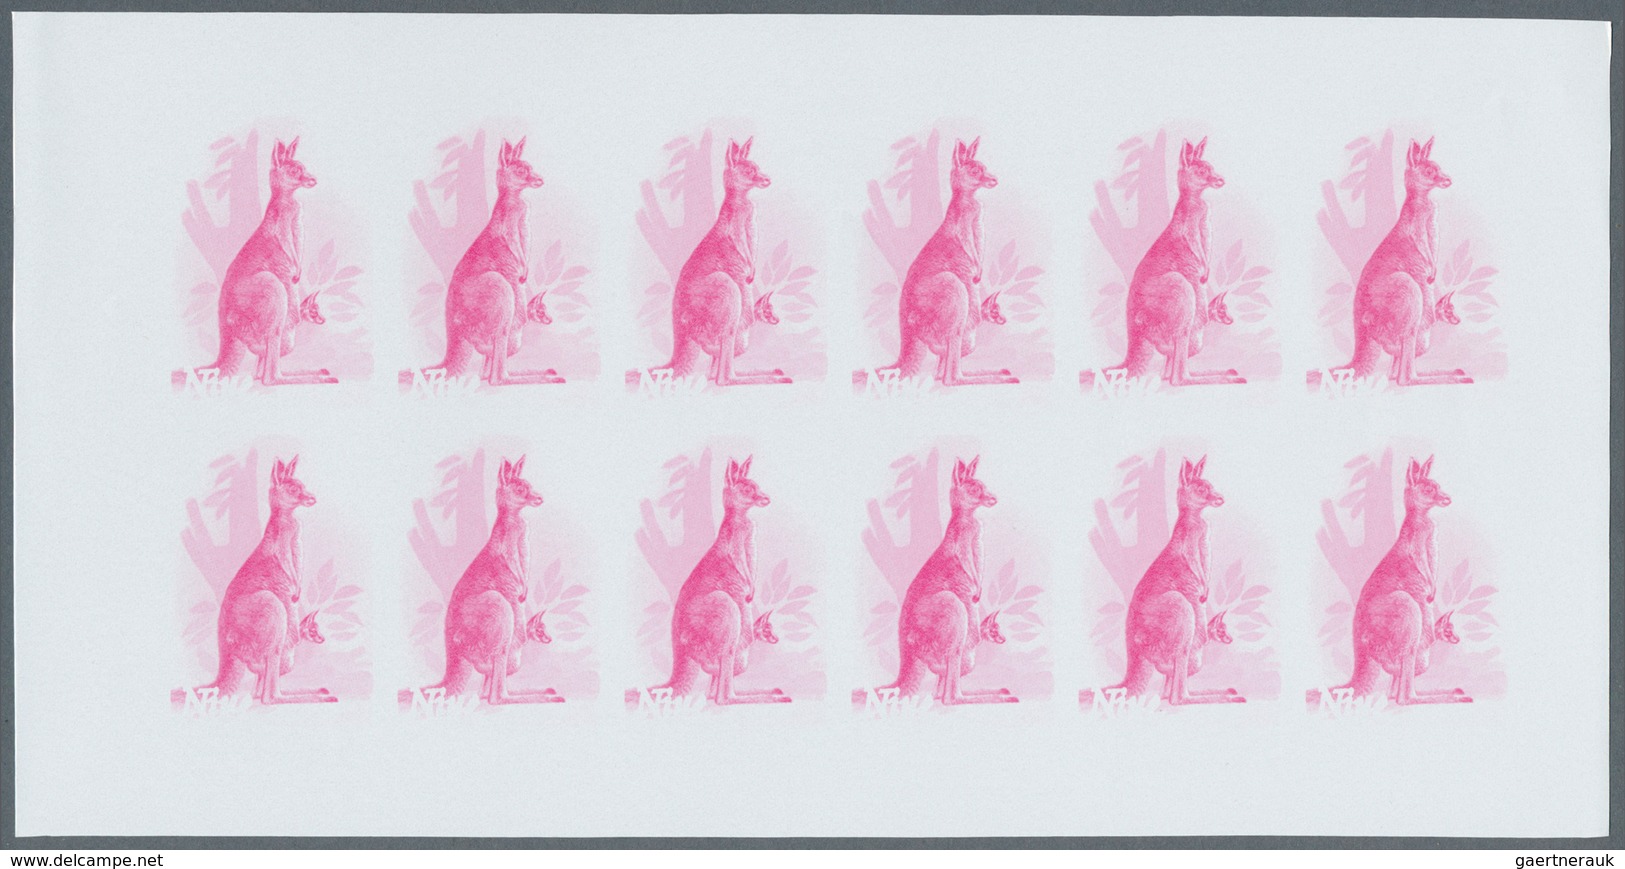 25668 Thematik: Tiere, Fauna / animals, fauna: 1984, Niue. Progressive proofs set of sheets for the comple